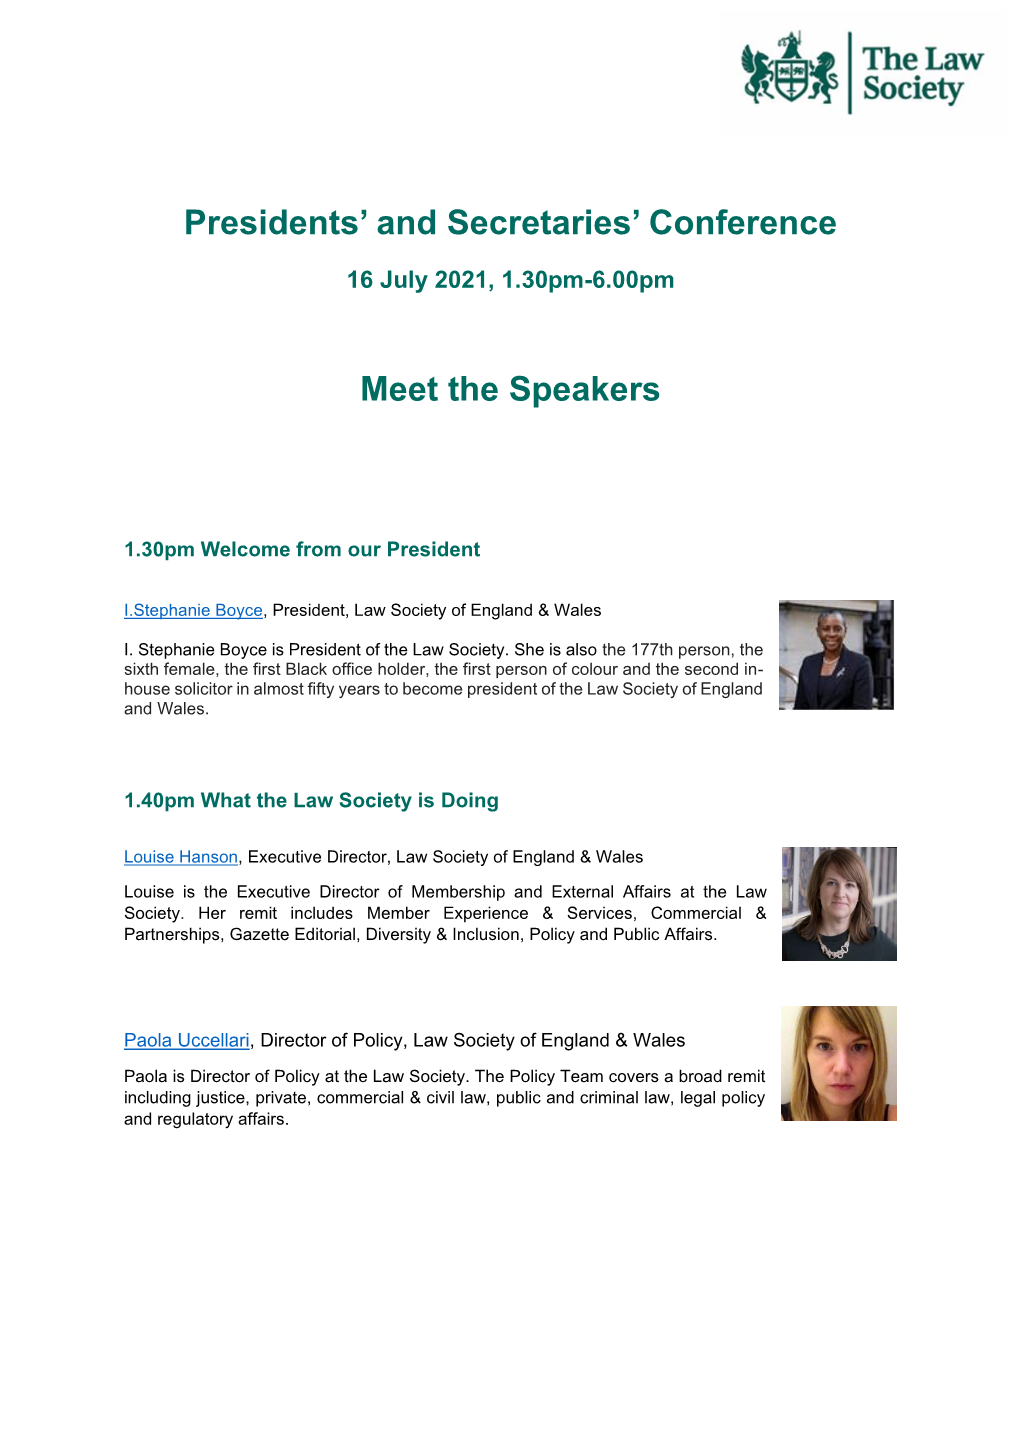 Presidents' and Secretaries' Conference Meet the Speakers